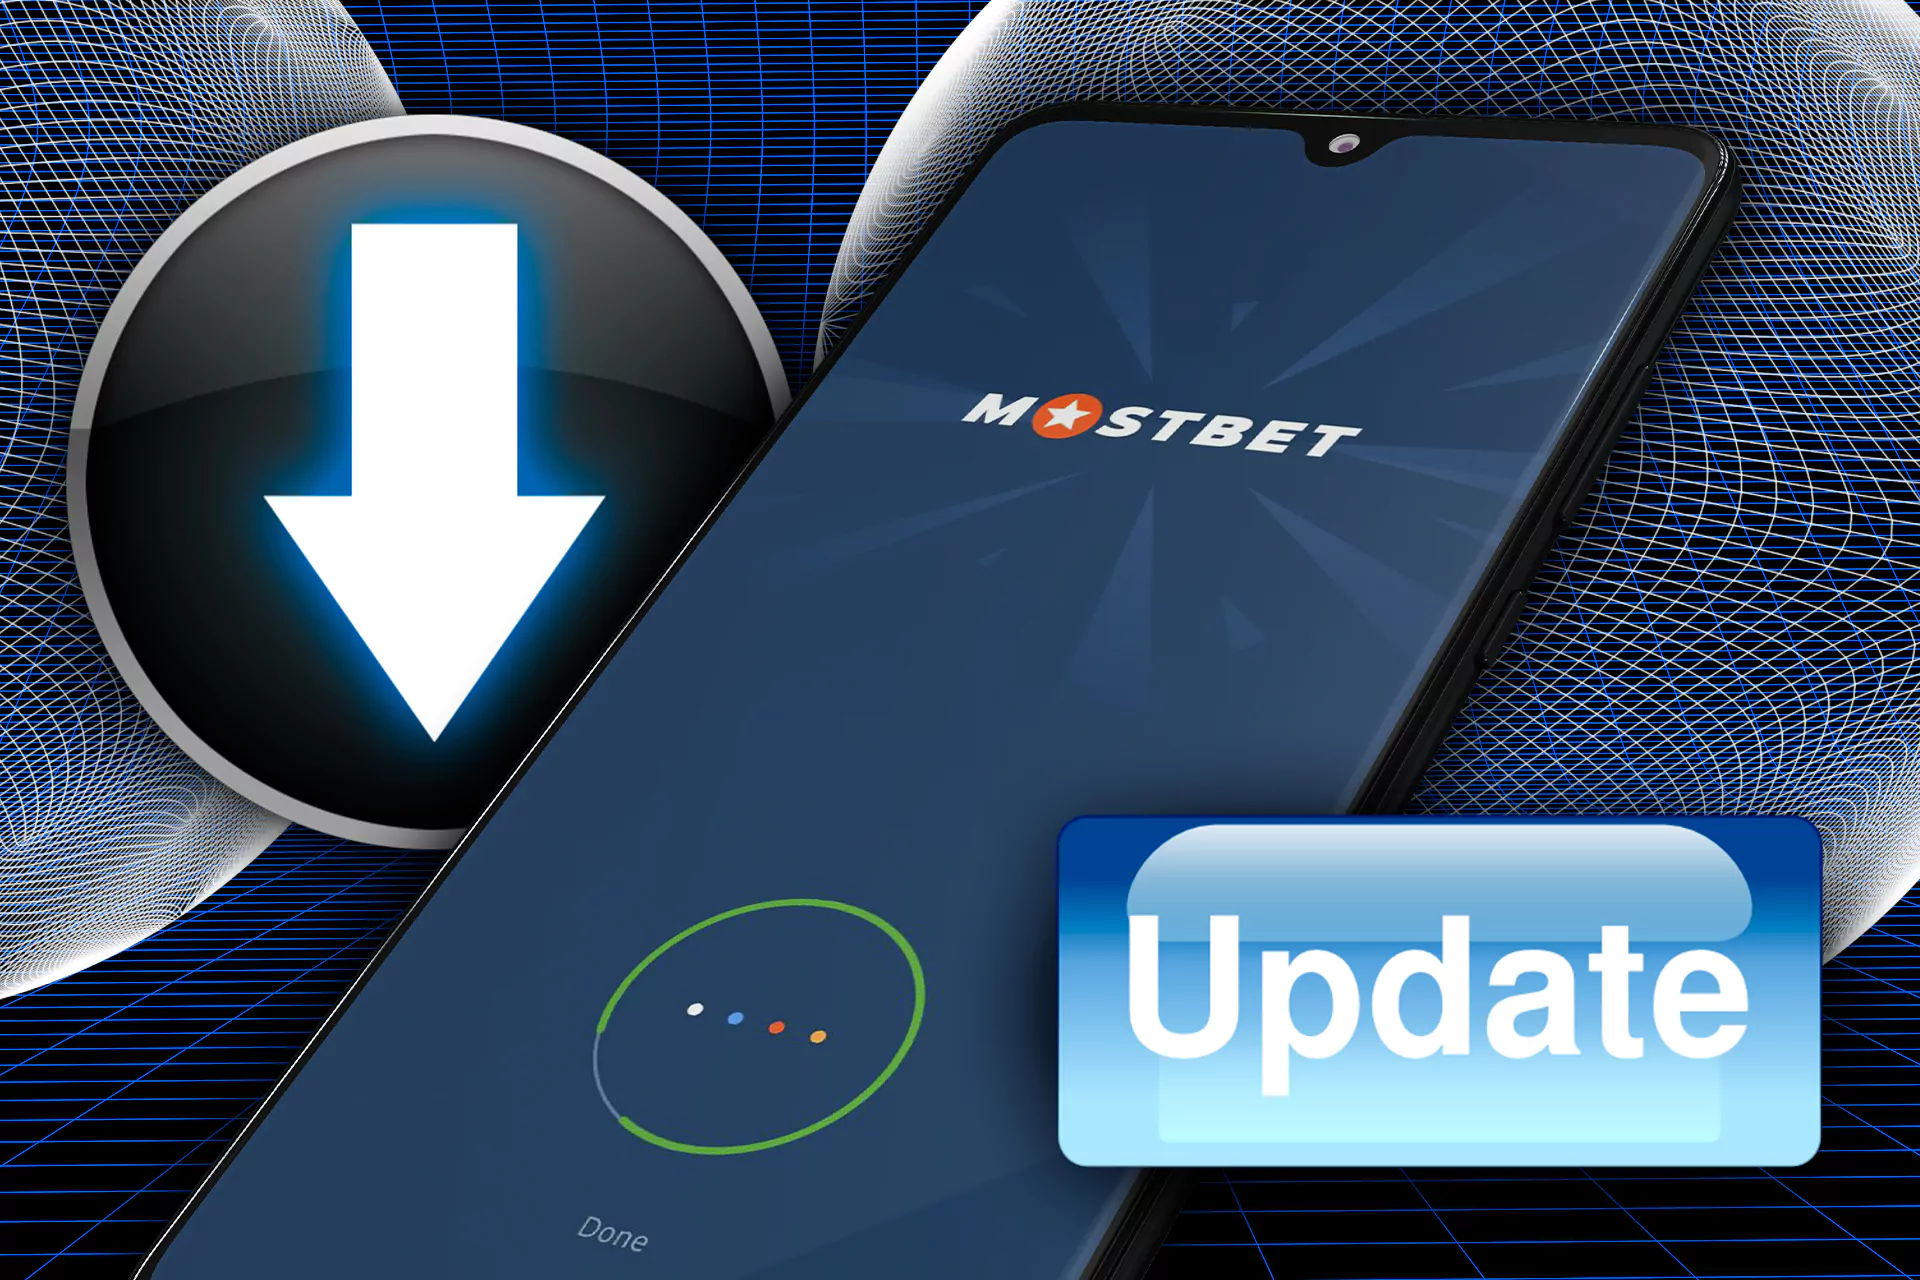 Set up and run the automatic update process for the app on Android.